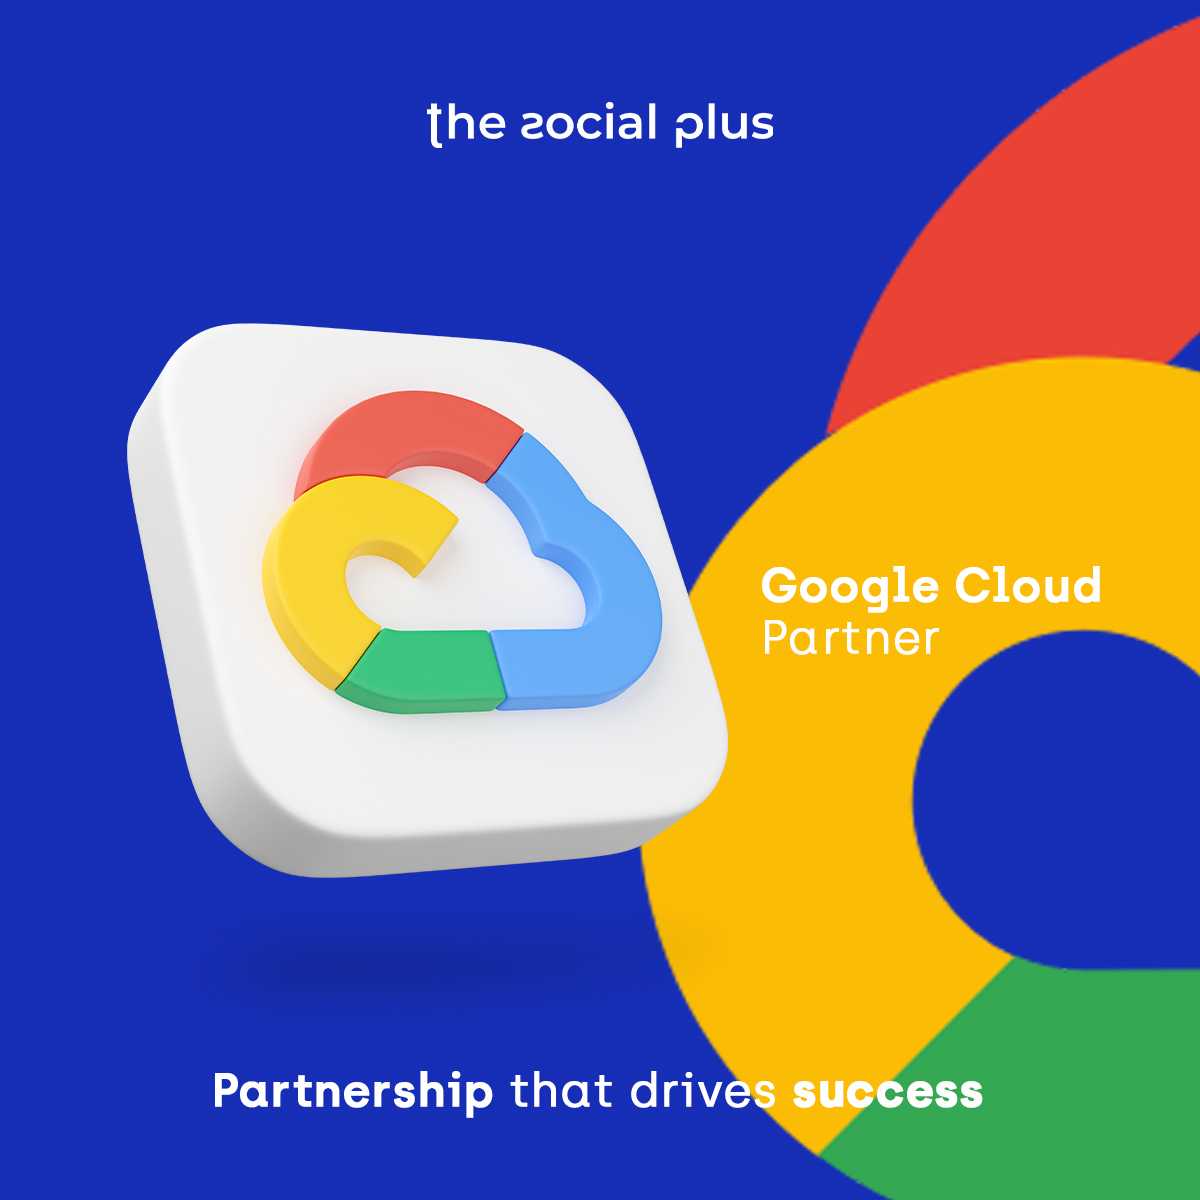 The Social Plus, a frontrunner in SaaS solutions, welcomes you to a new era of social networking. Our alliance with Google Cloud ensures a robust, high-performance platform that empowers your online connections.🌟

#TheSocialPlus #GoogleCloudPartner #SaaS